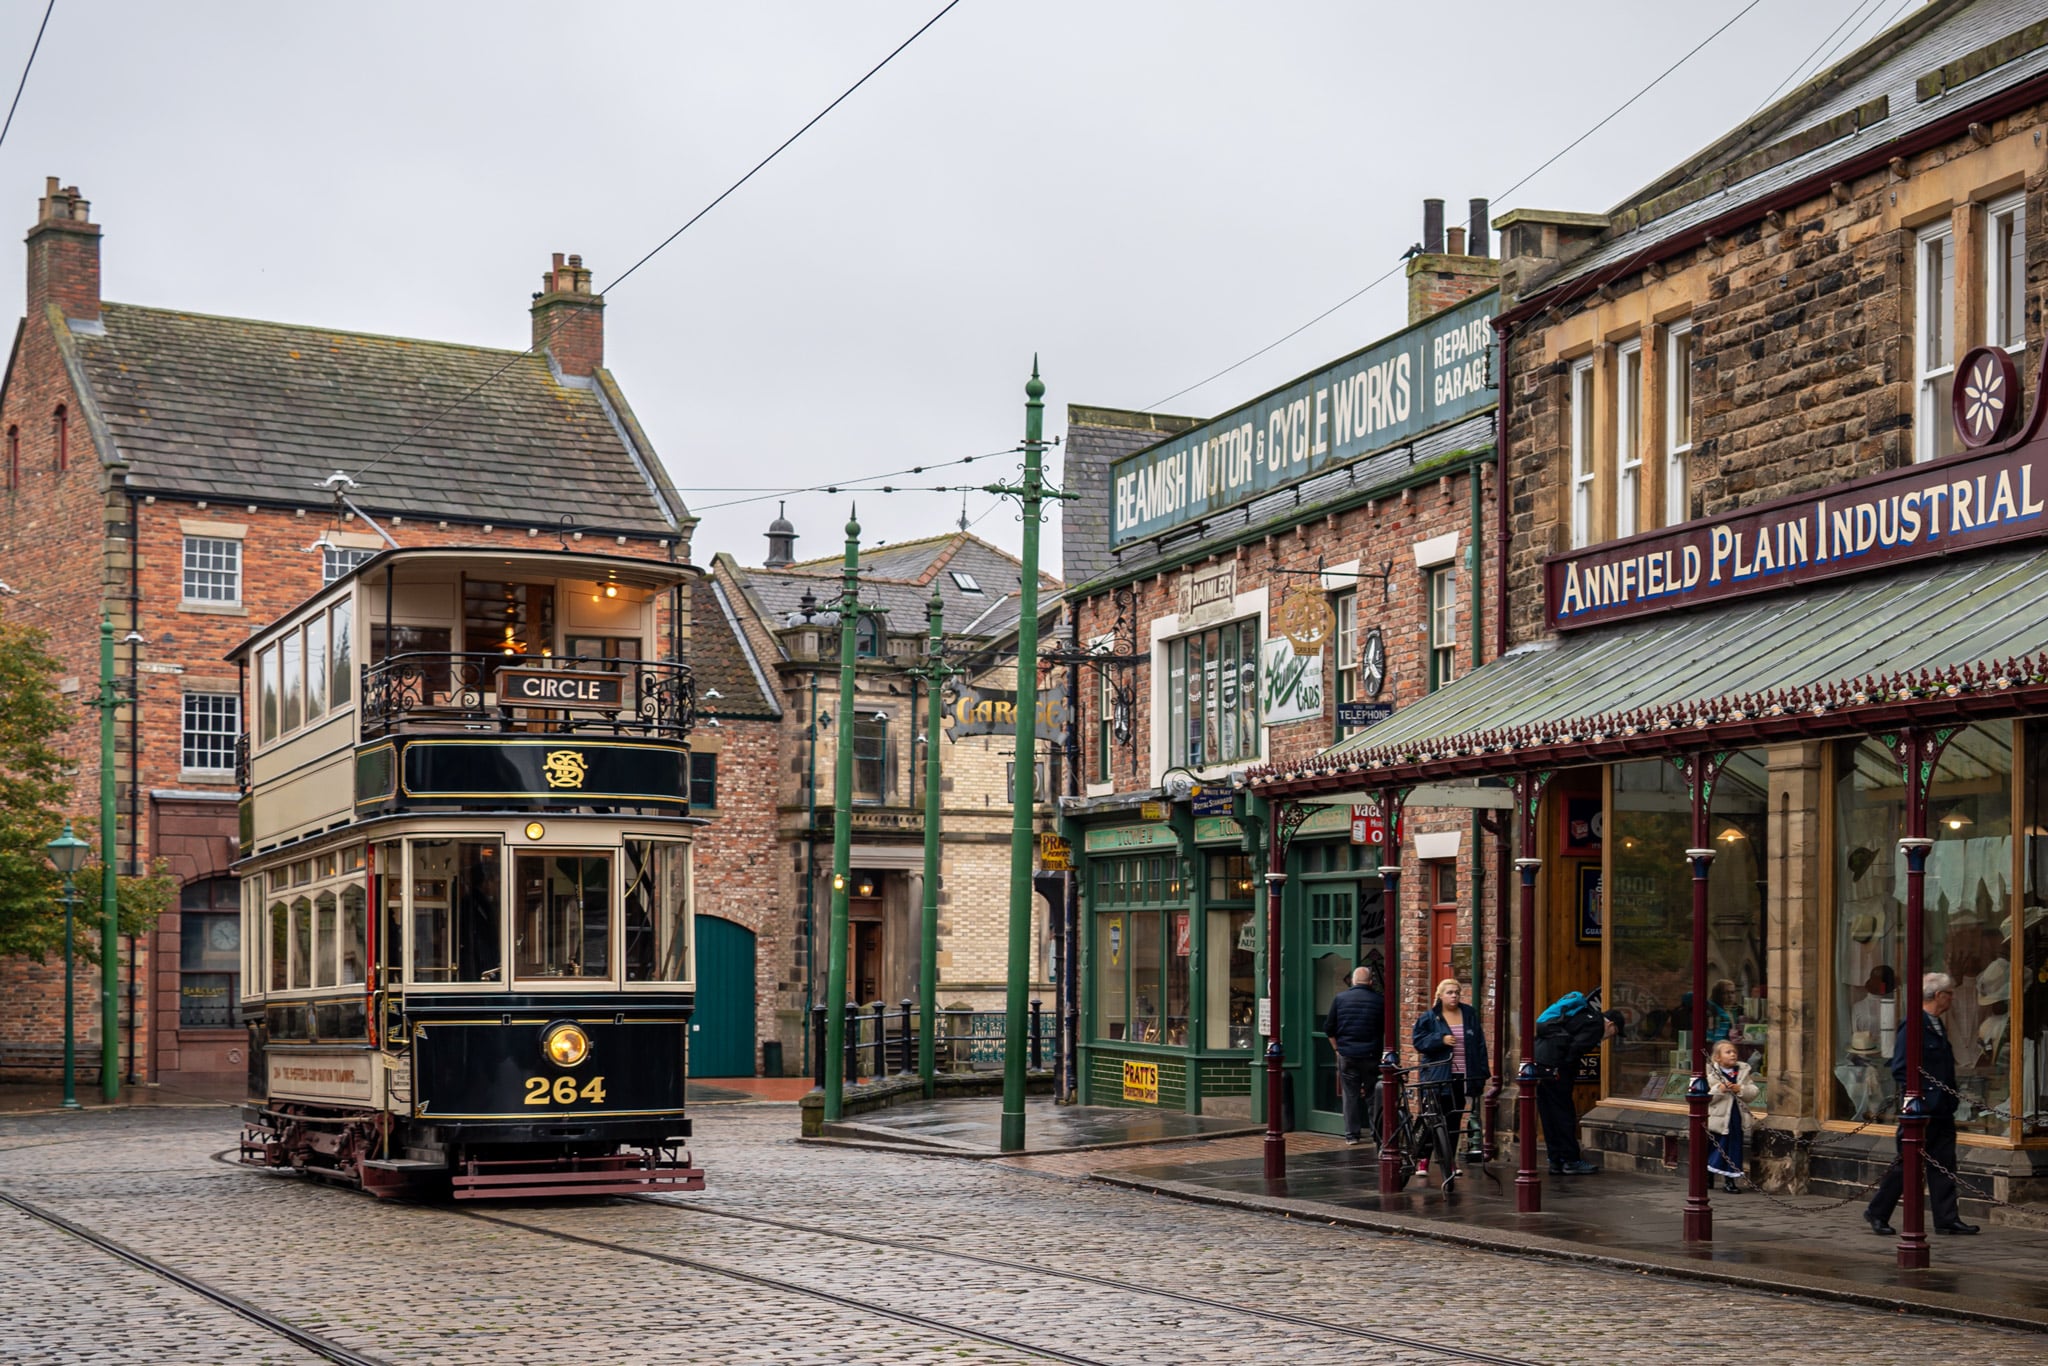 A vintage tram passes by old-style Victorian shops with wooden signs and porches